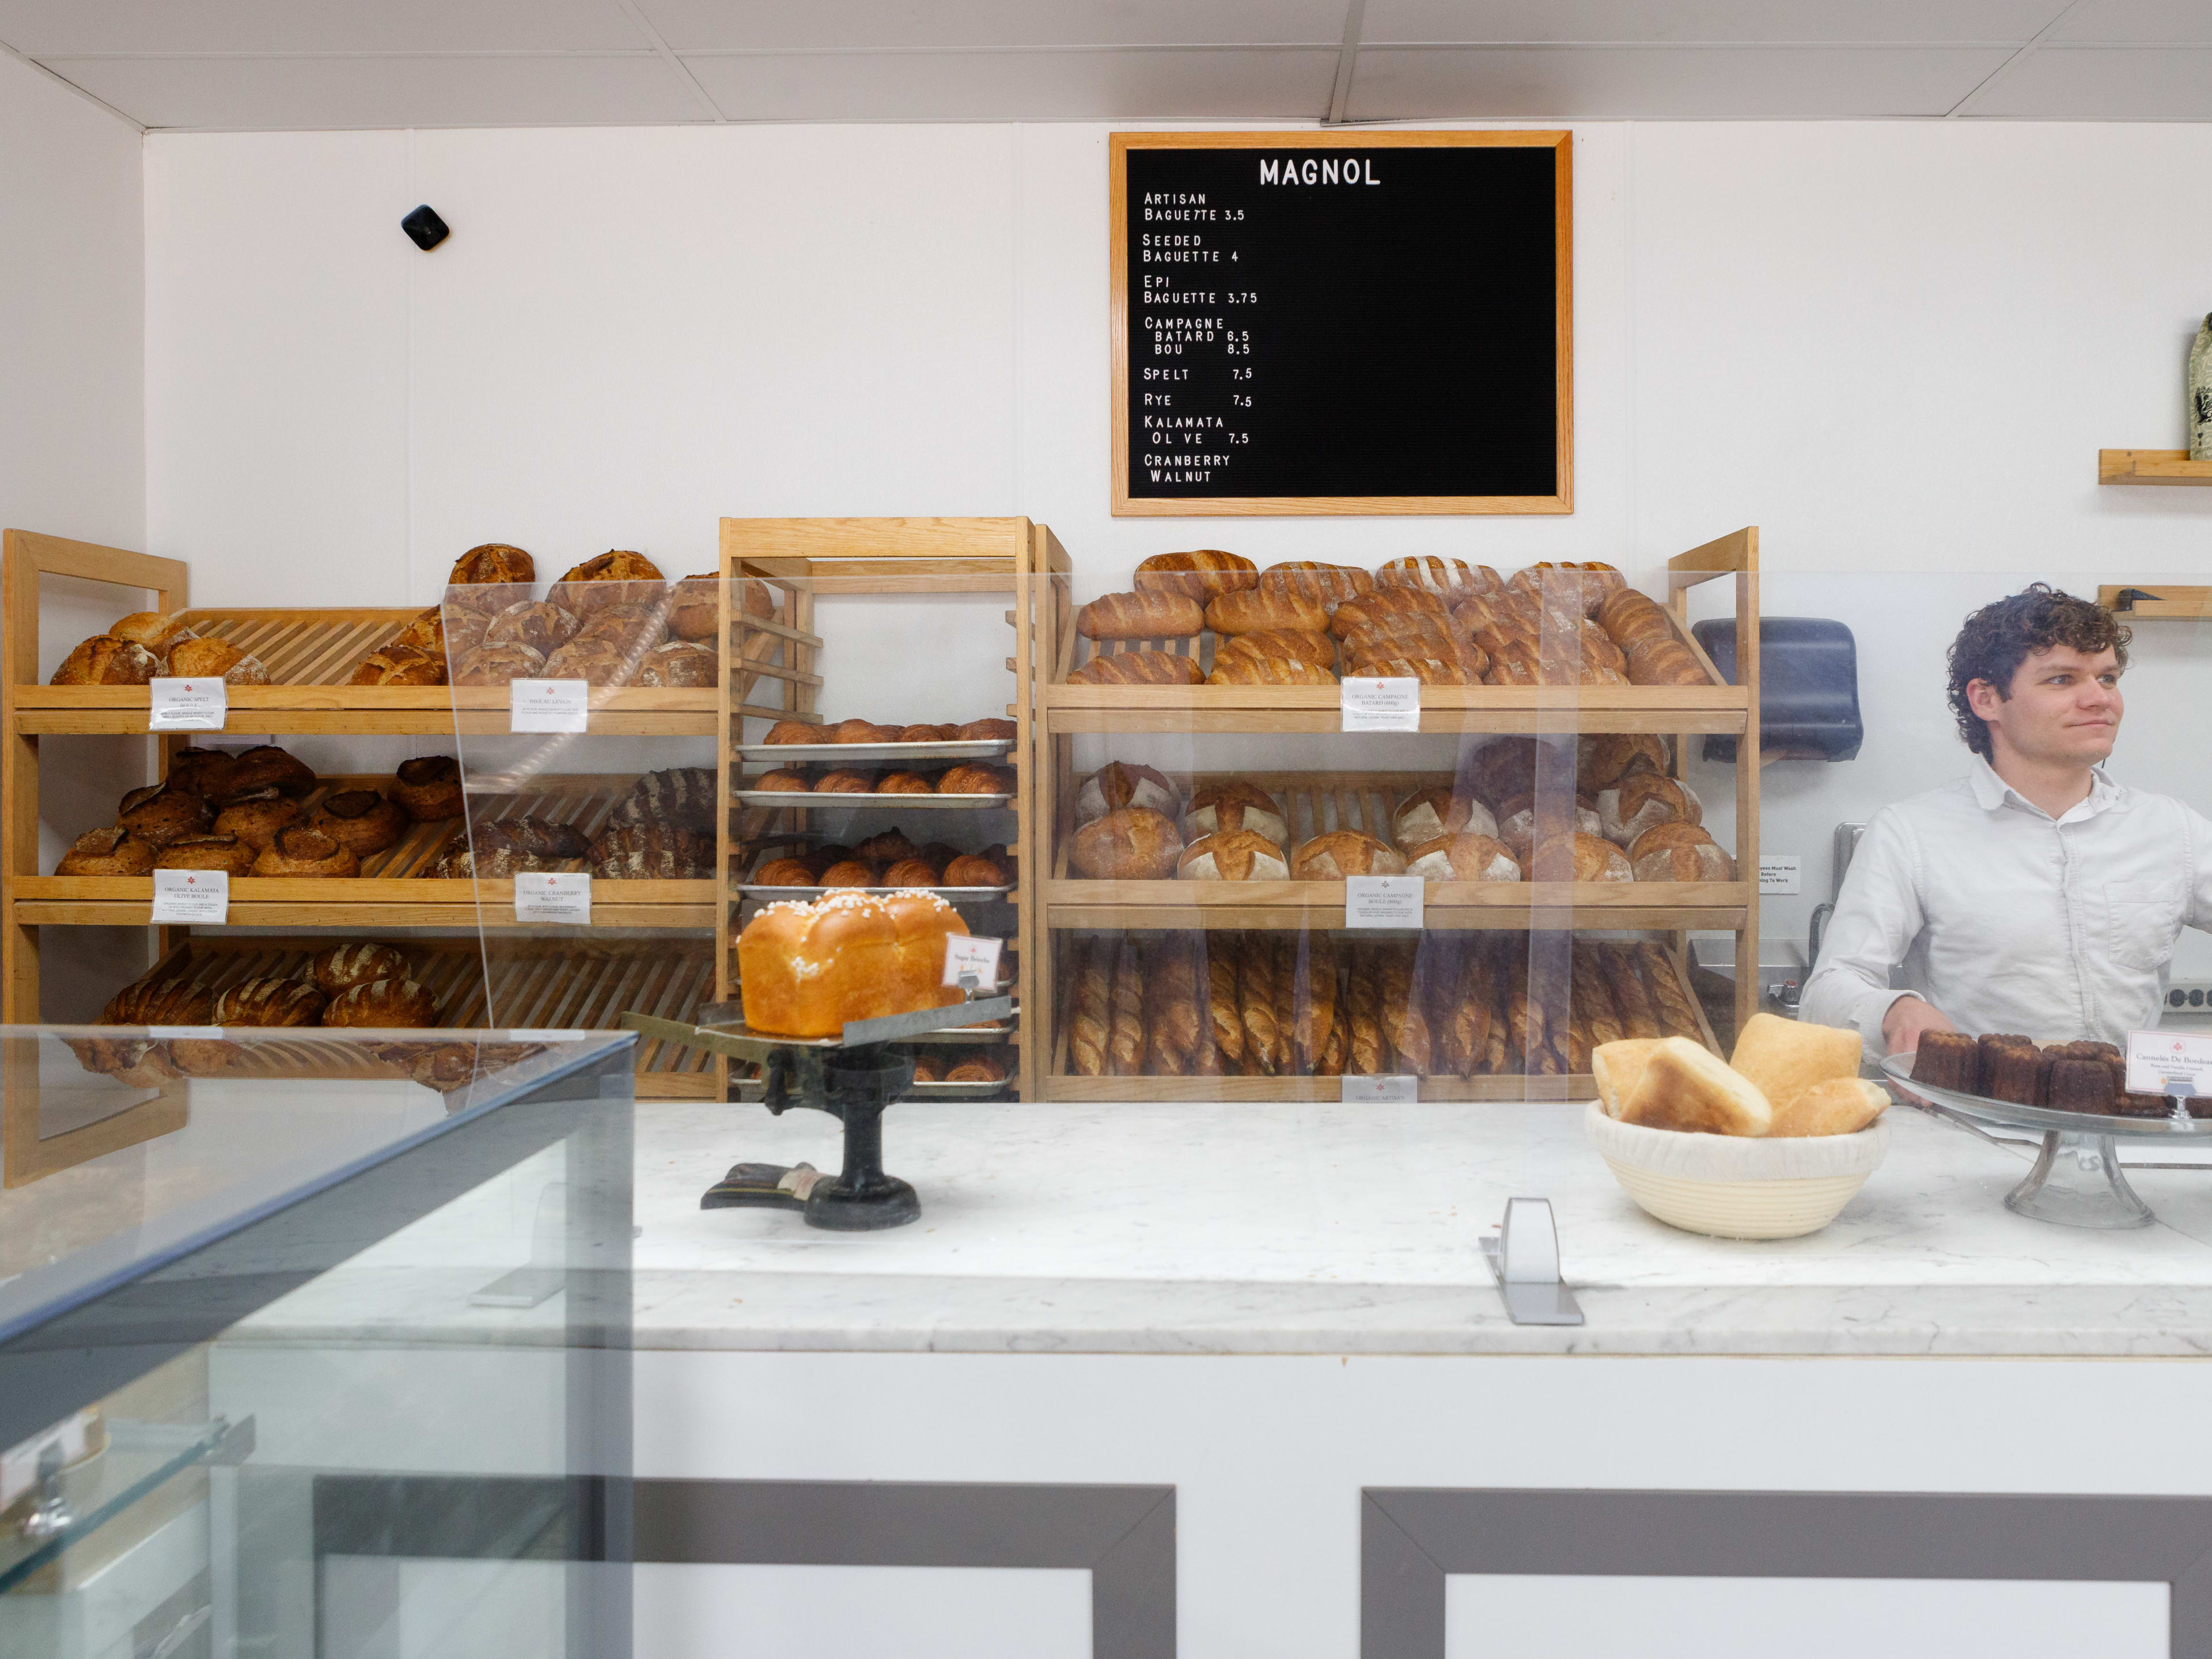 The counter and bread at Magnol.